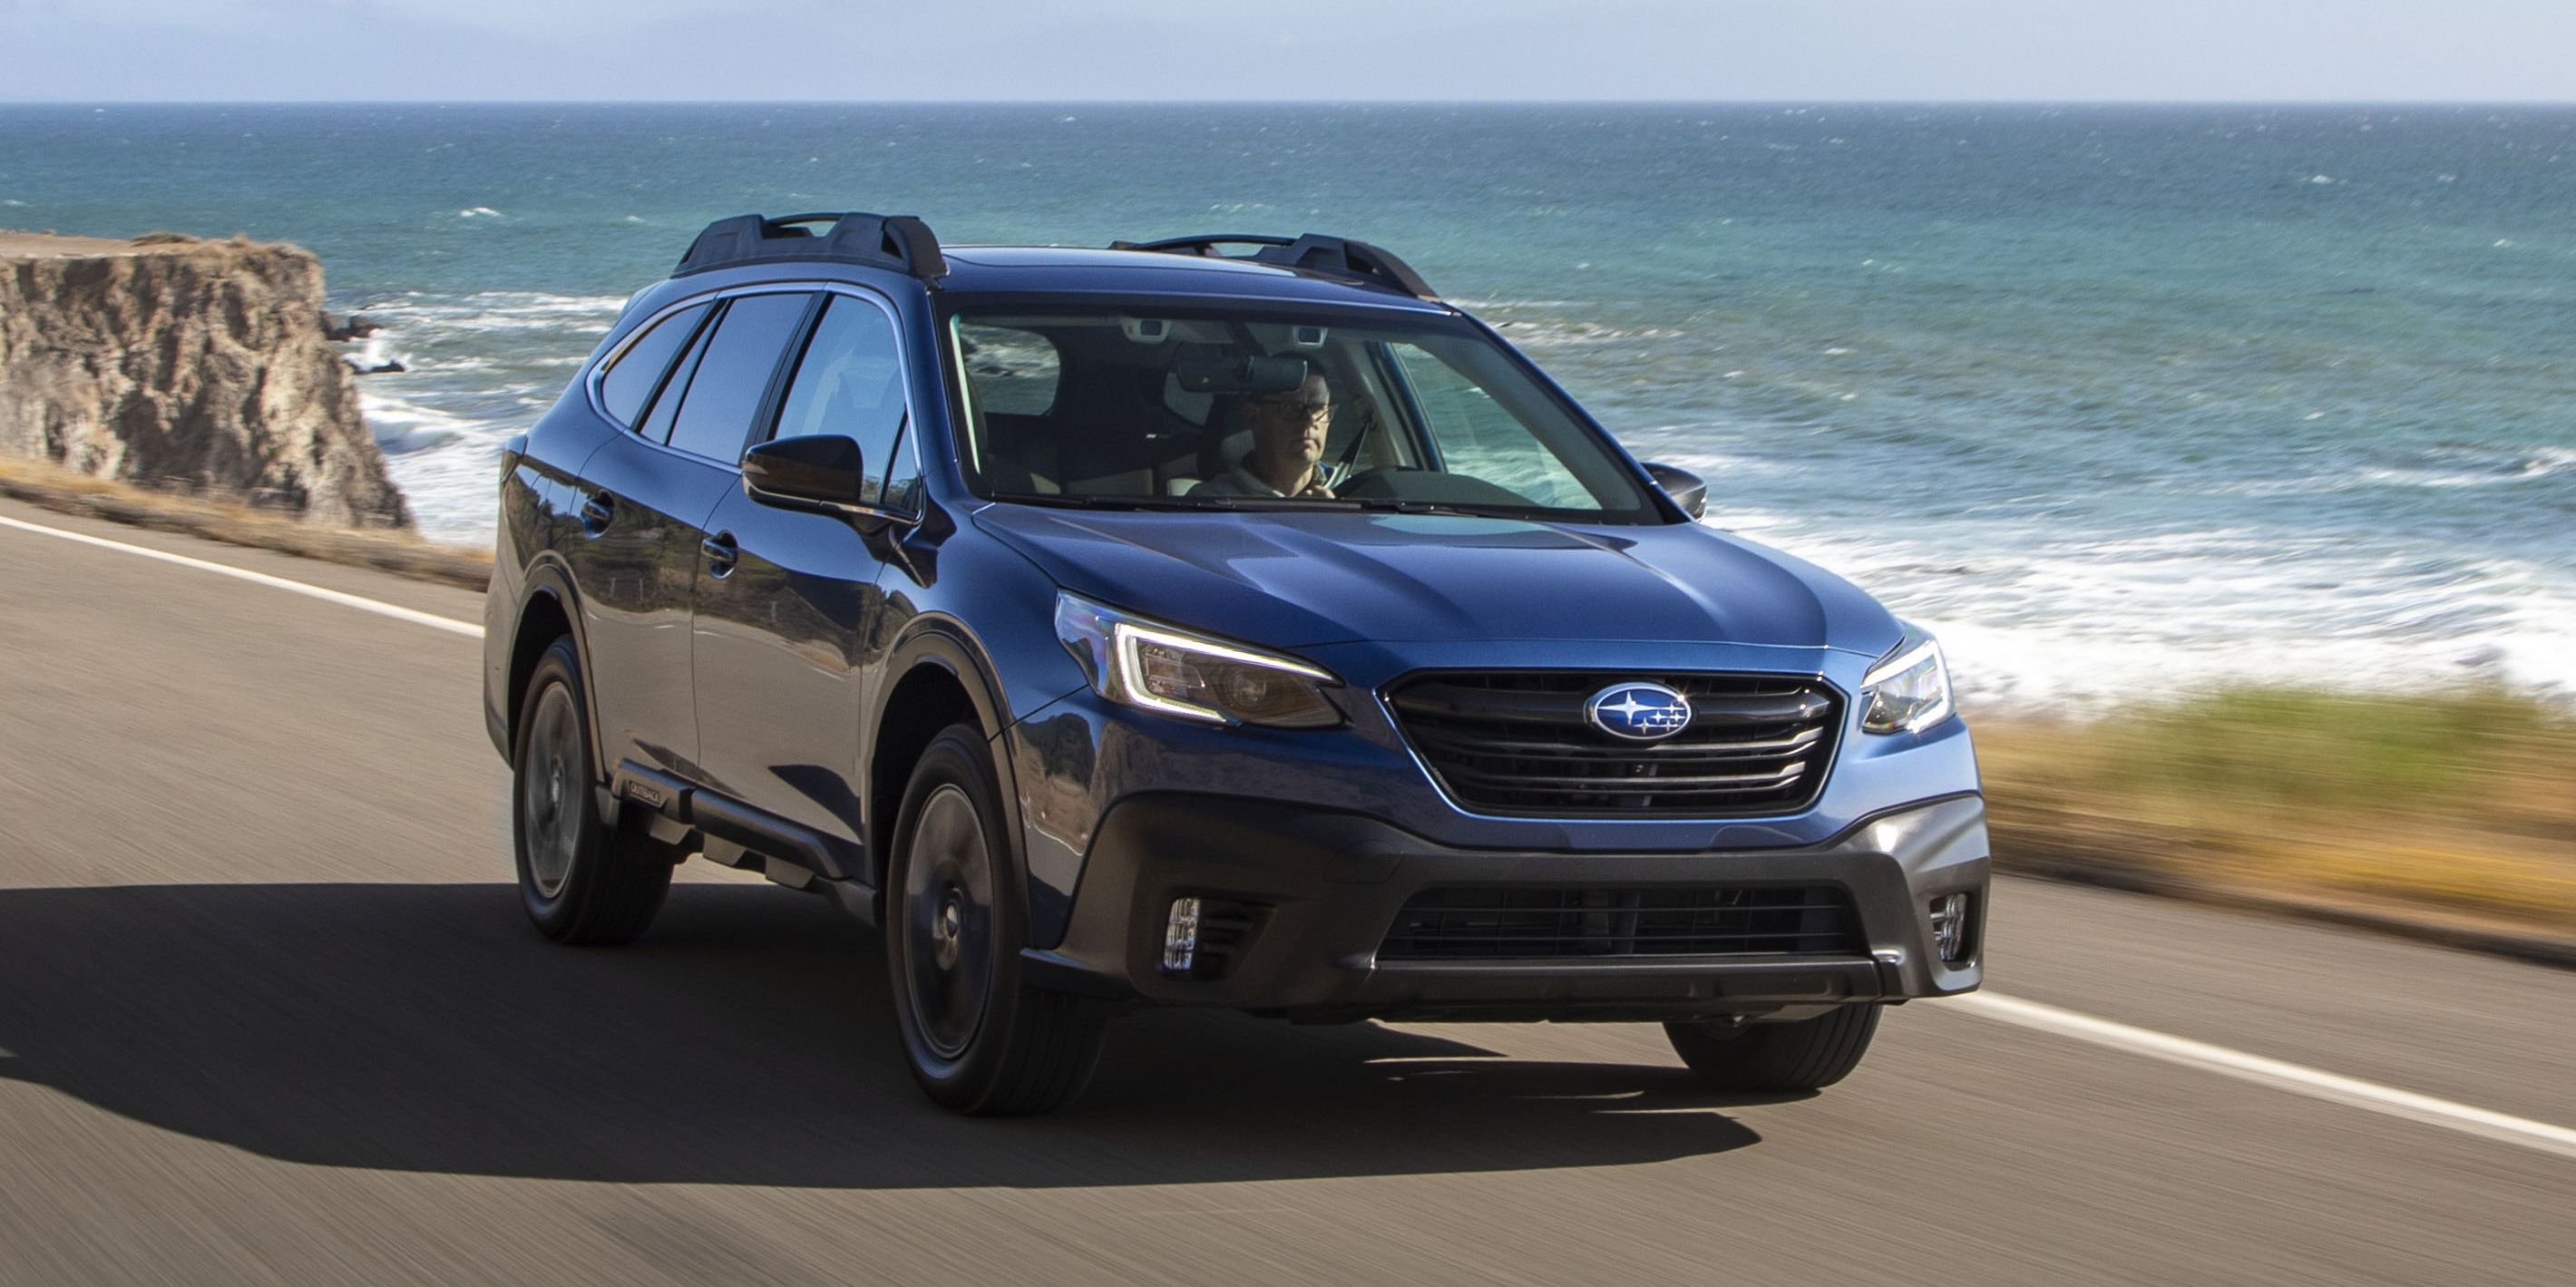 2021 Subaru Outback Review, Pricing, and Specs